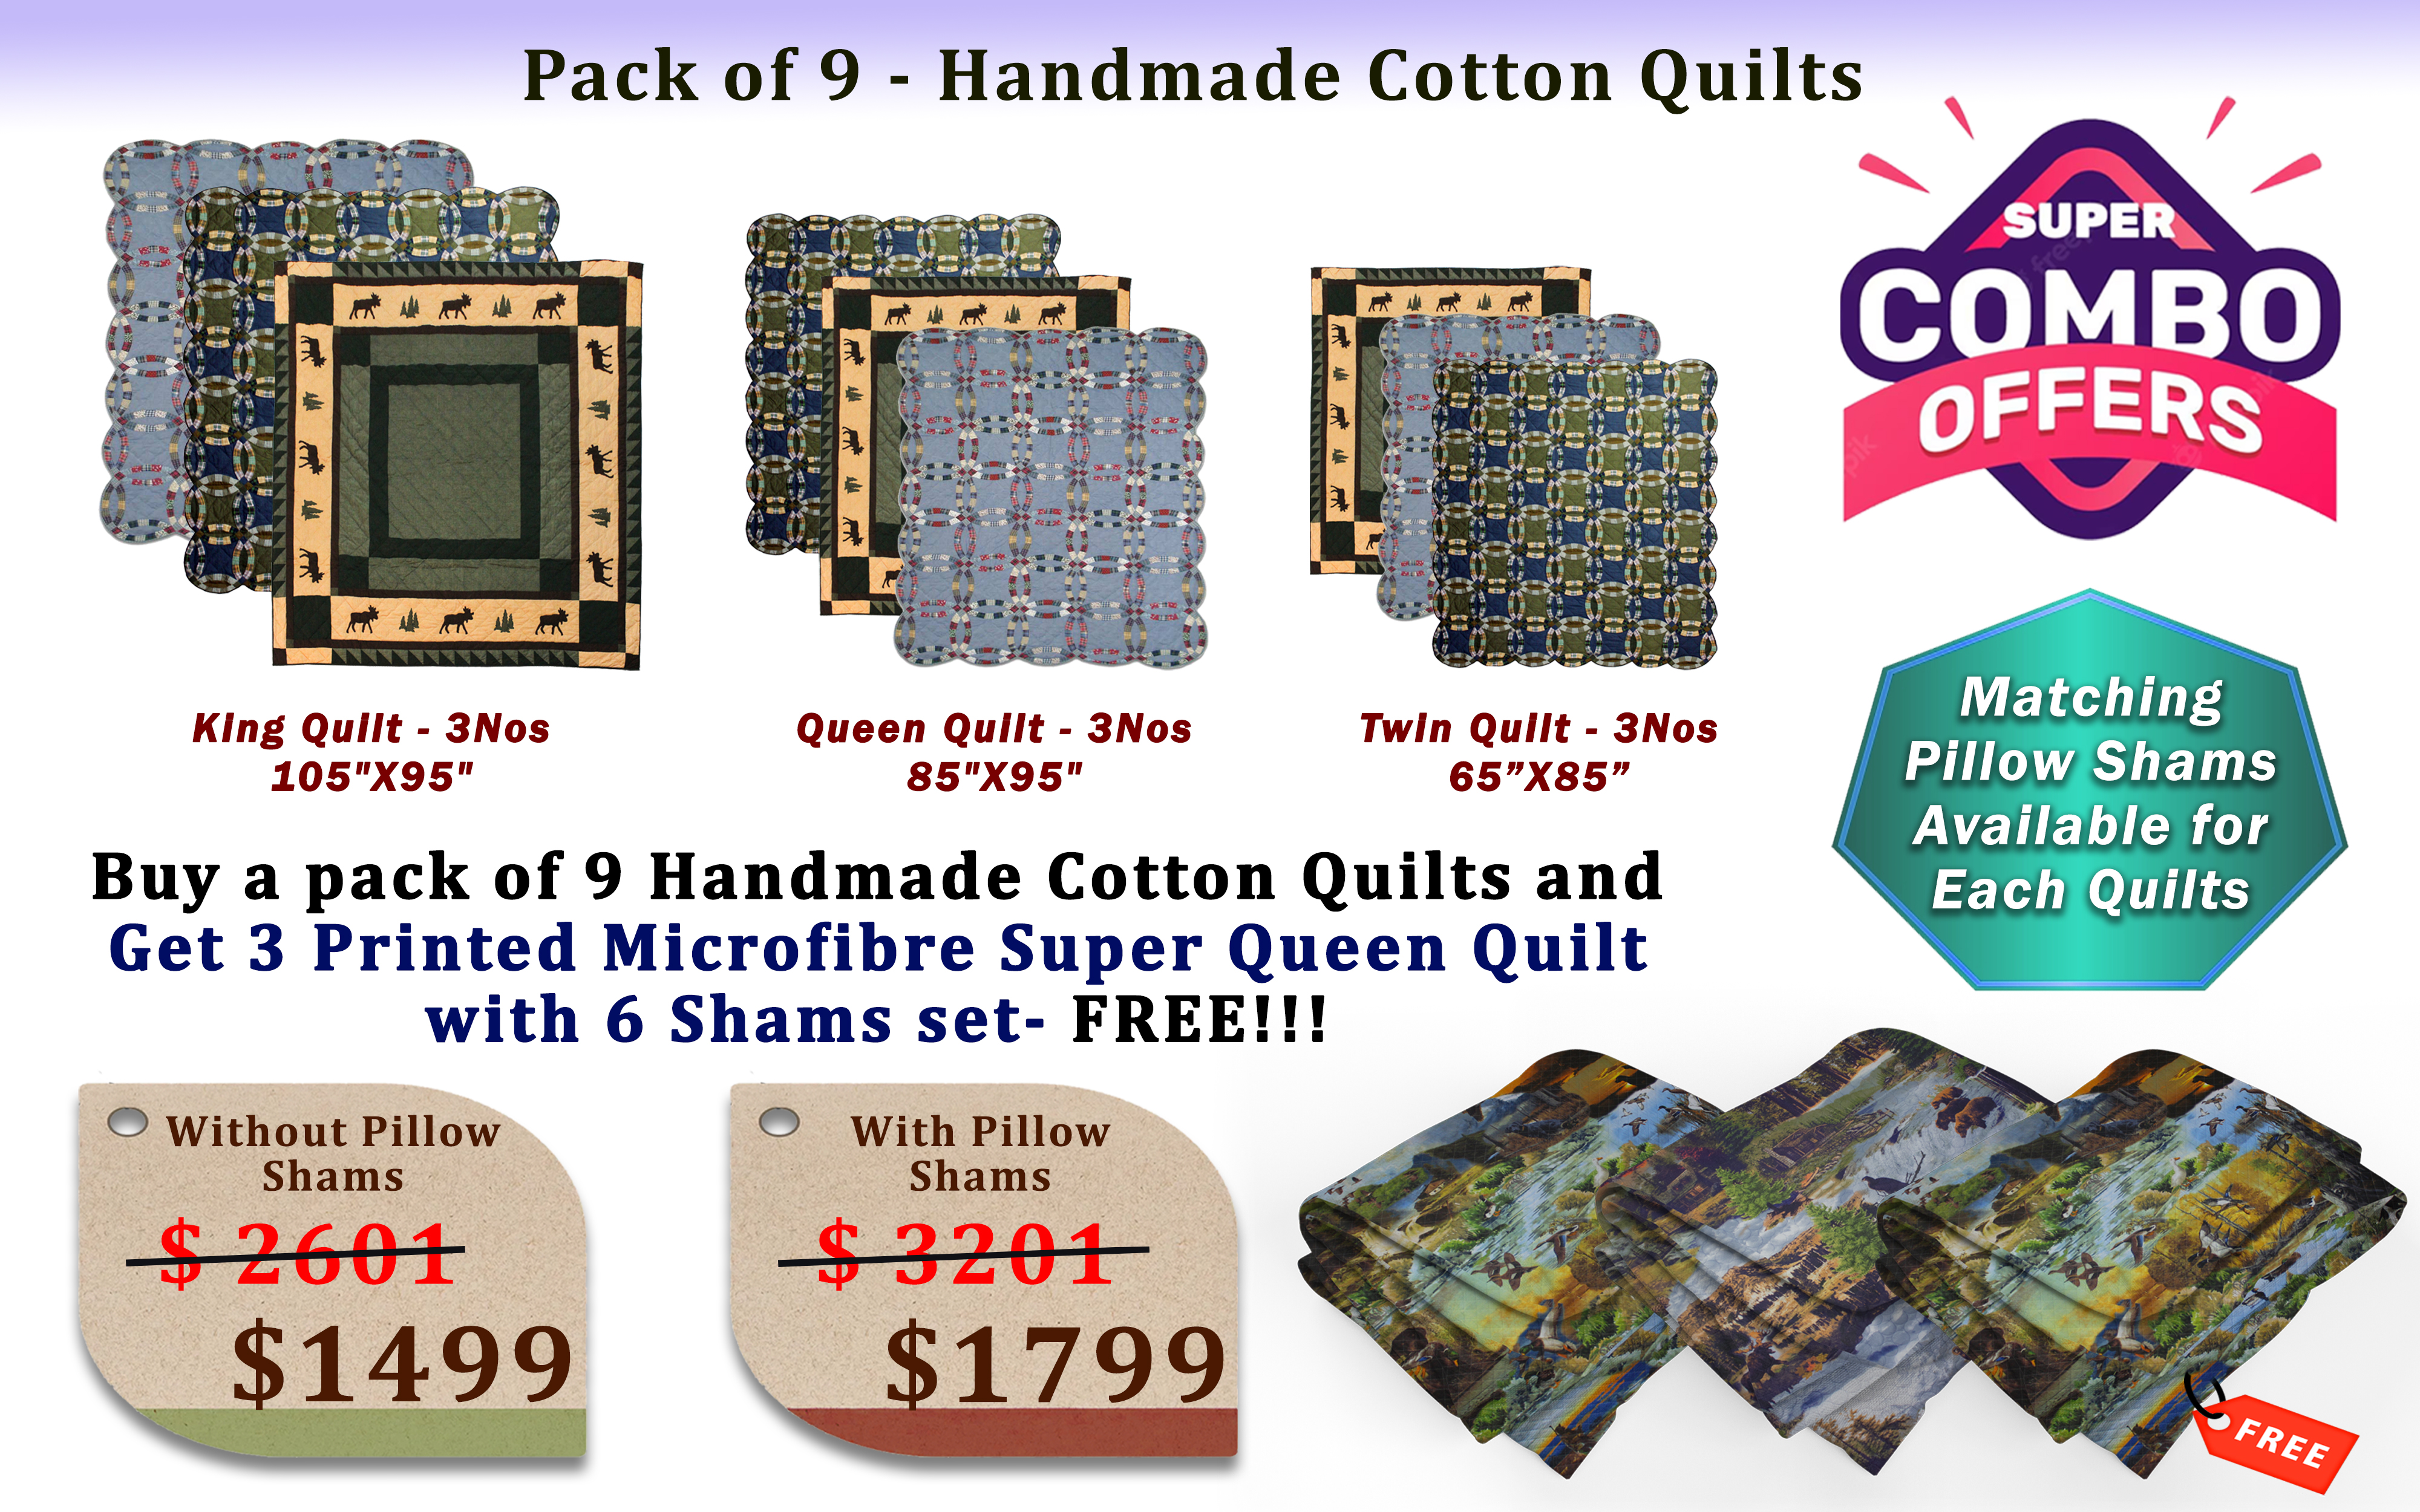 Pack of 9 Cotton Quilts